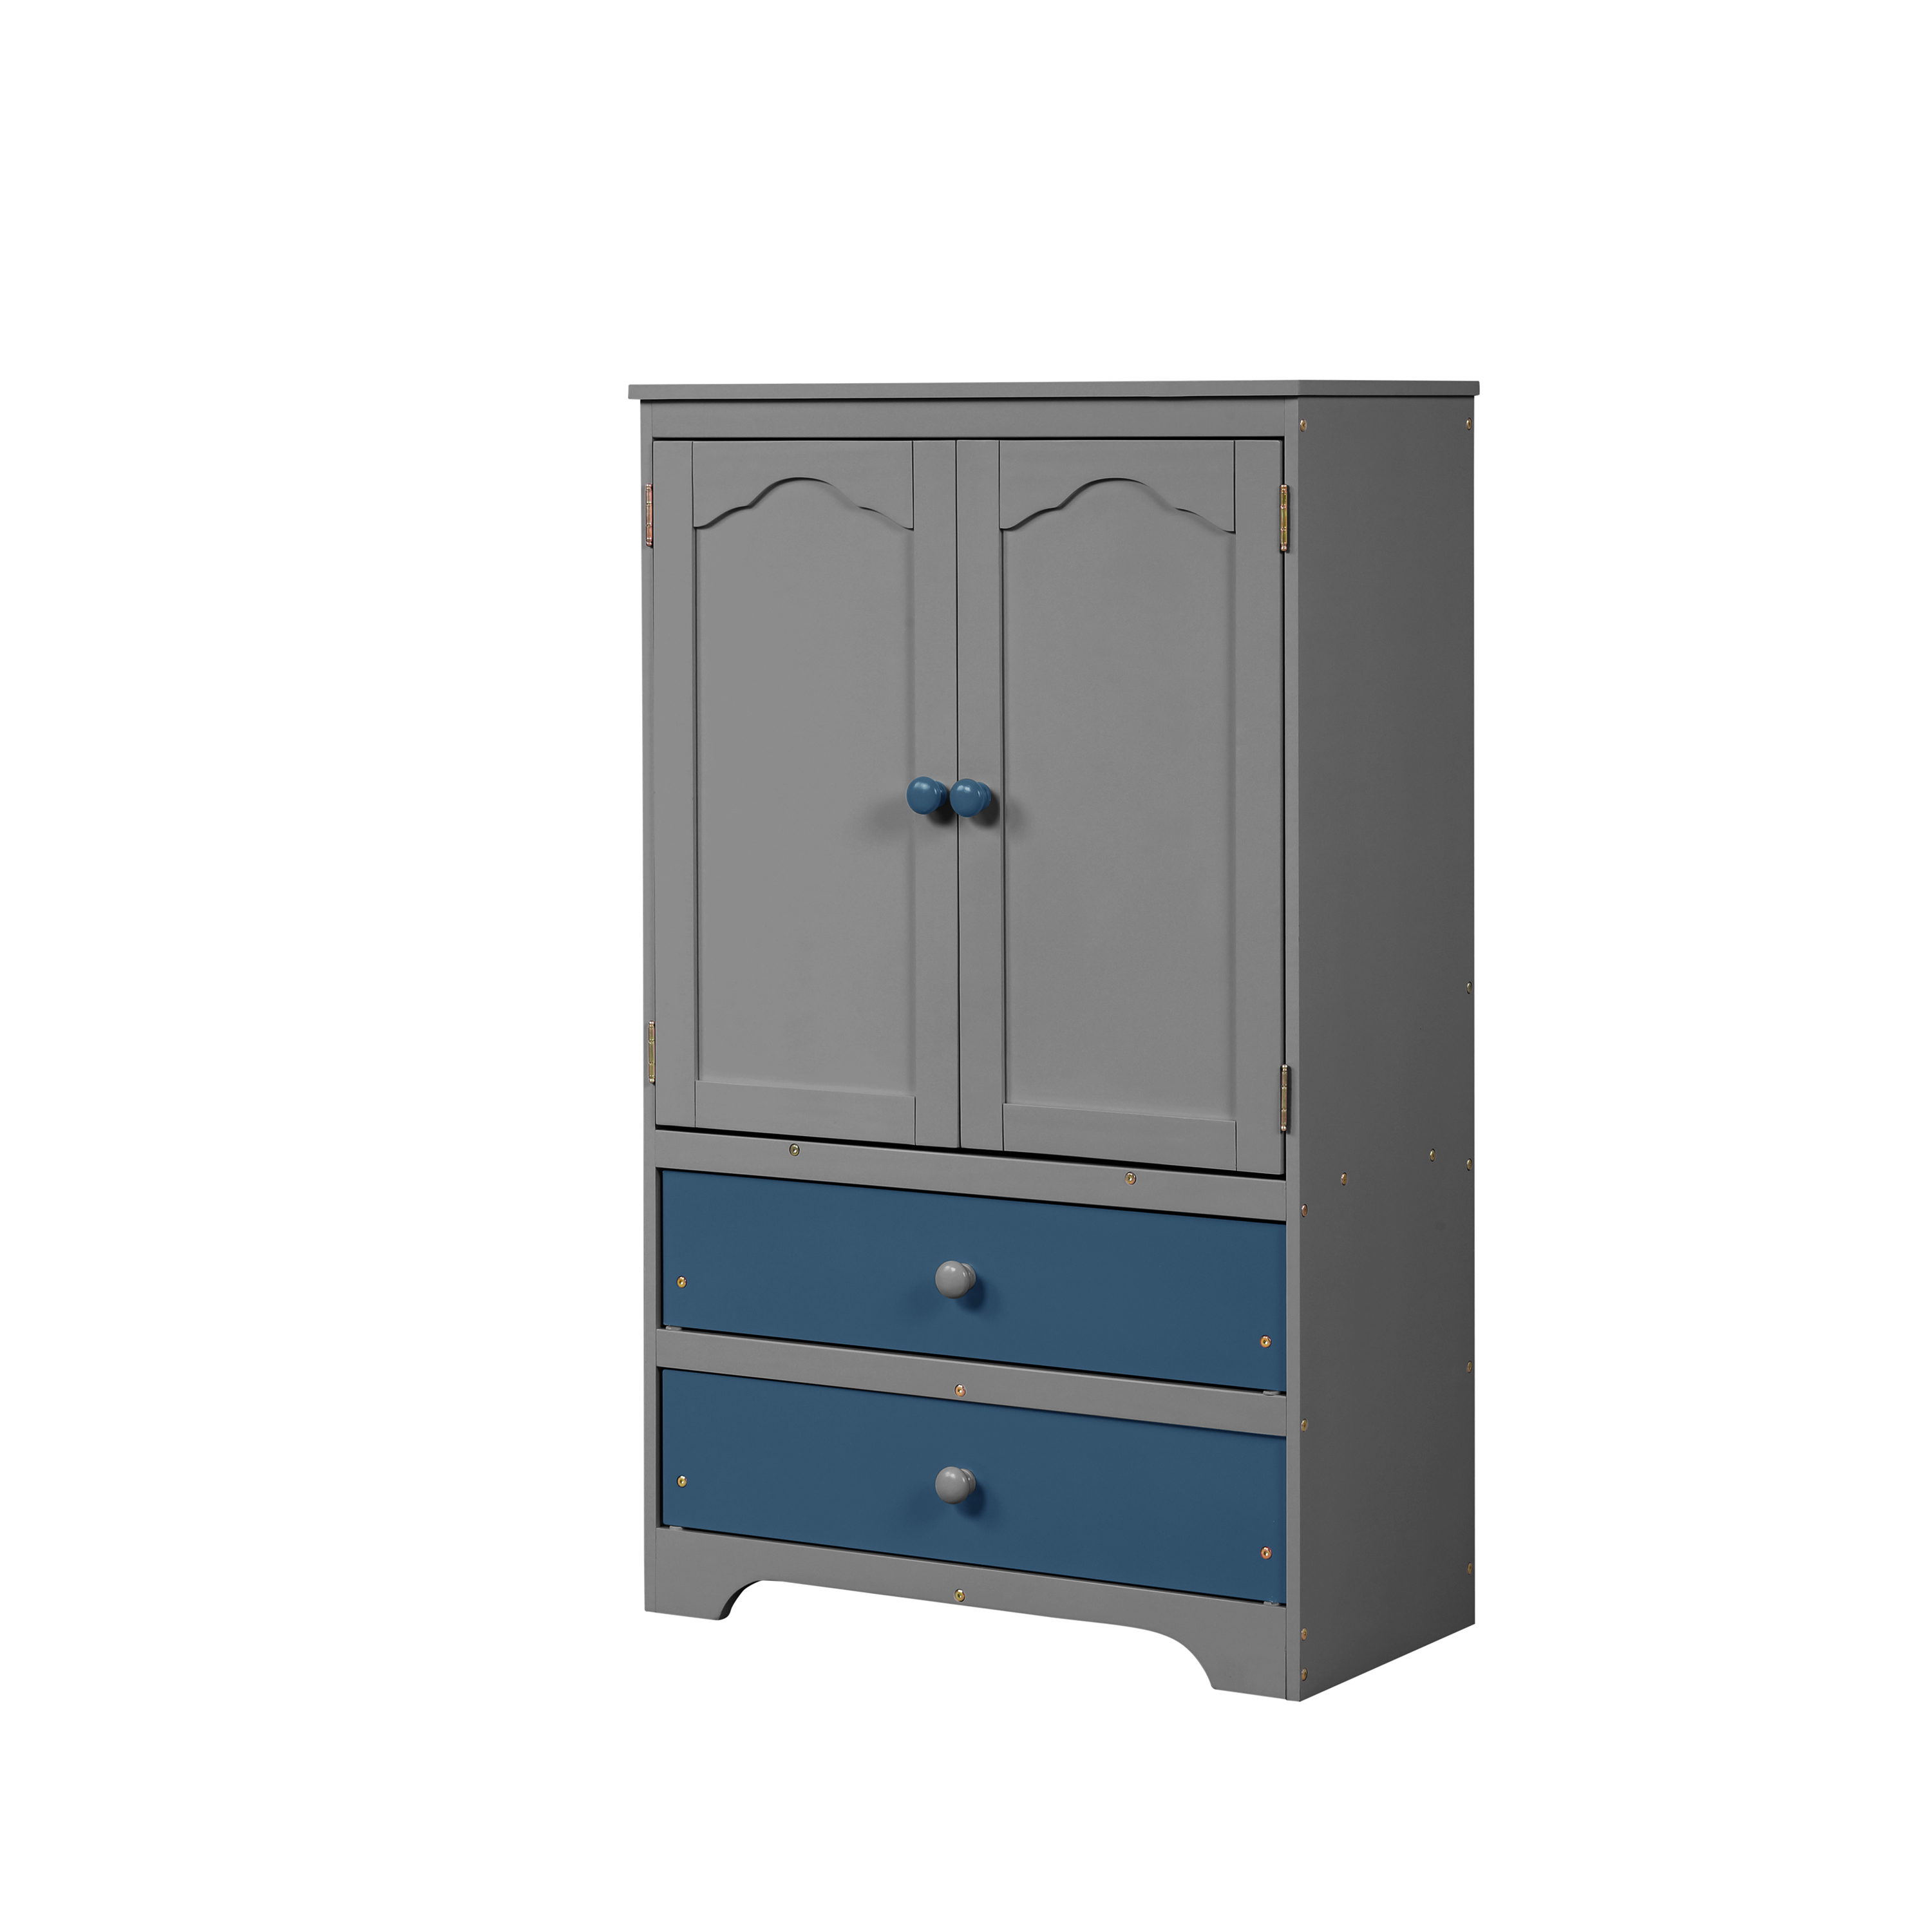 PRACTICAL SIDE CABINET FOR TWO TONE NAVY BLUE WITH GRAY COLOR